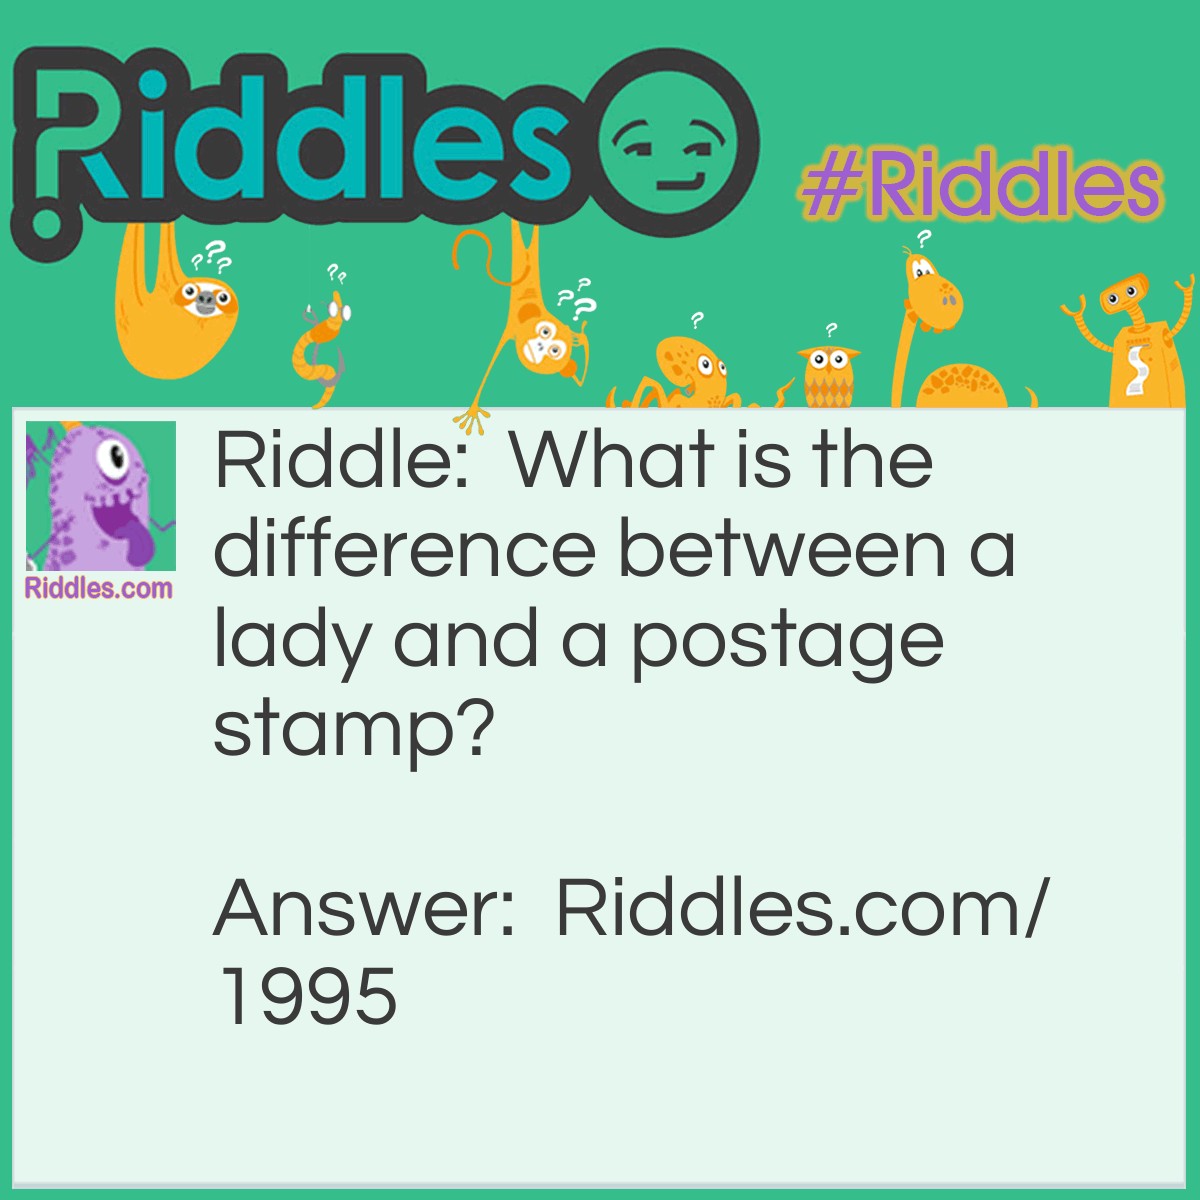 Riddle: What is the difference between a lady and a postage stamp? Answer: One is female, the other is mail-fee.